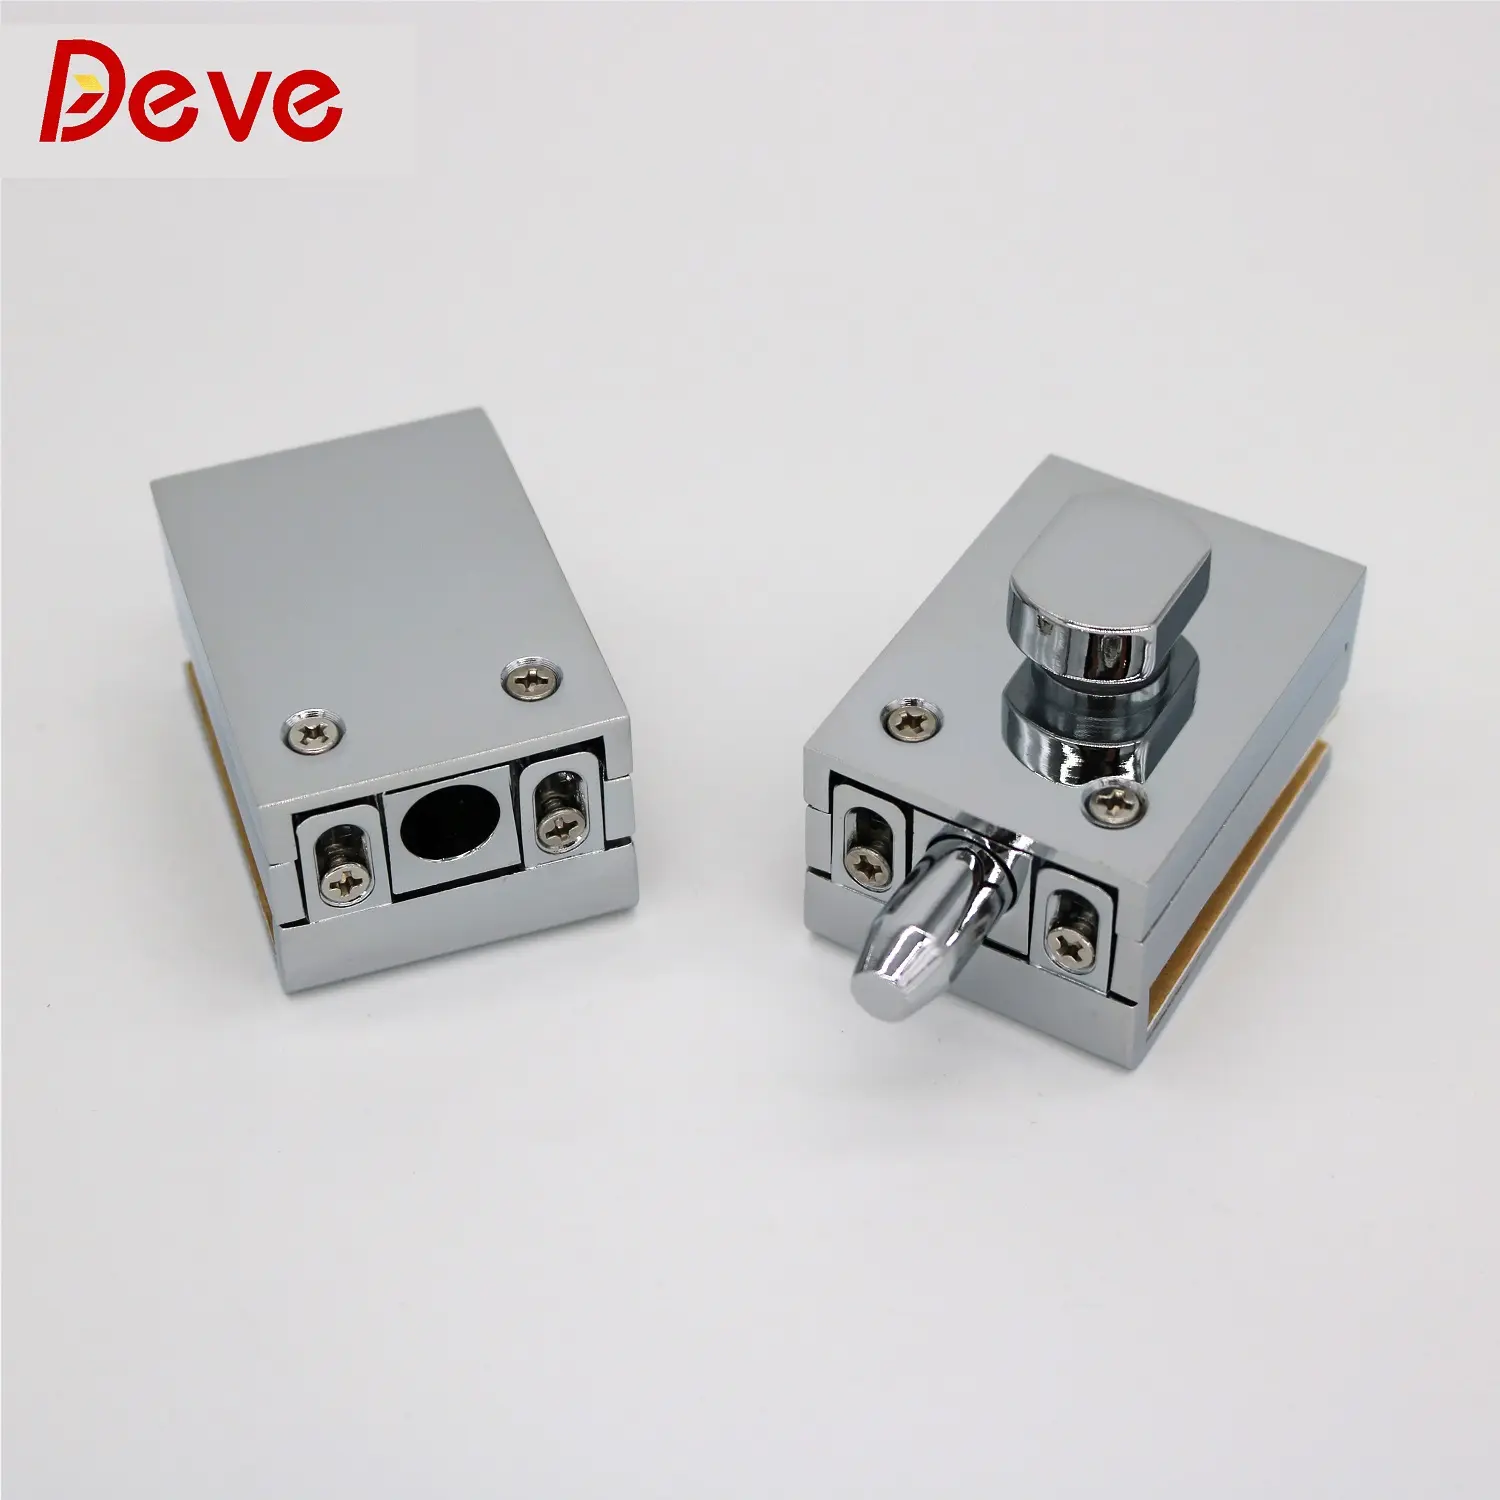 Excellent European Quality Zinc Alloy Square Insertion Glass Door Lock without Key for bathroom